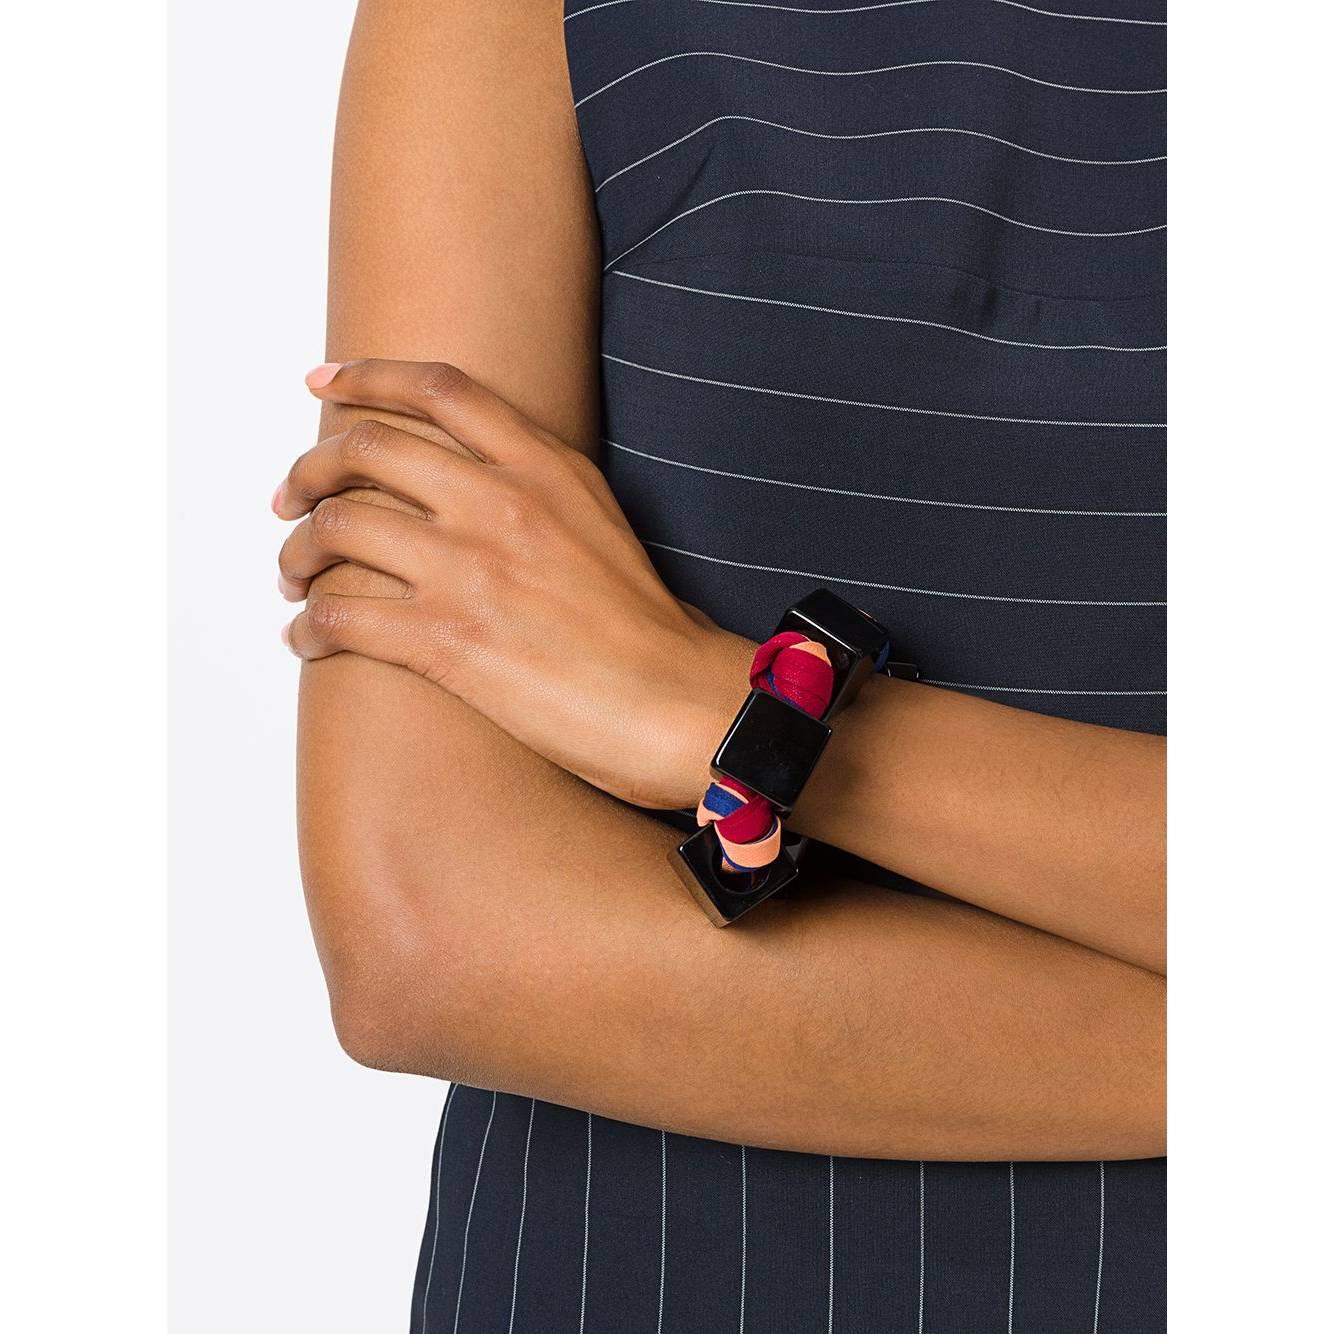 Giorgio Armani multicolor viscose interwoven threads bracelet with black cubic synthetic pearls. T-bar lock.

Measurements
Length: 24 cm
Height: 2 cm

Product code: A5669

Notes: The product shows a nicked pearl and light signs of wear, as shown in